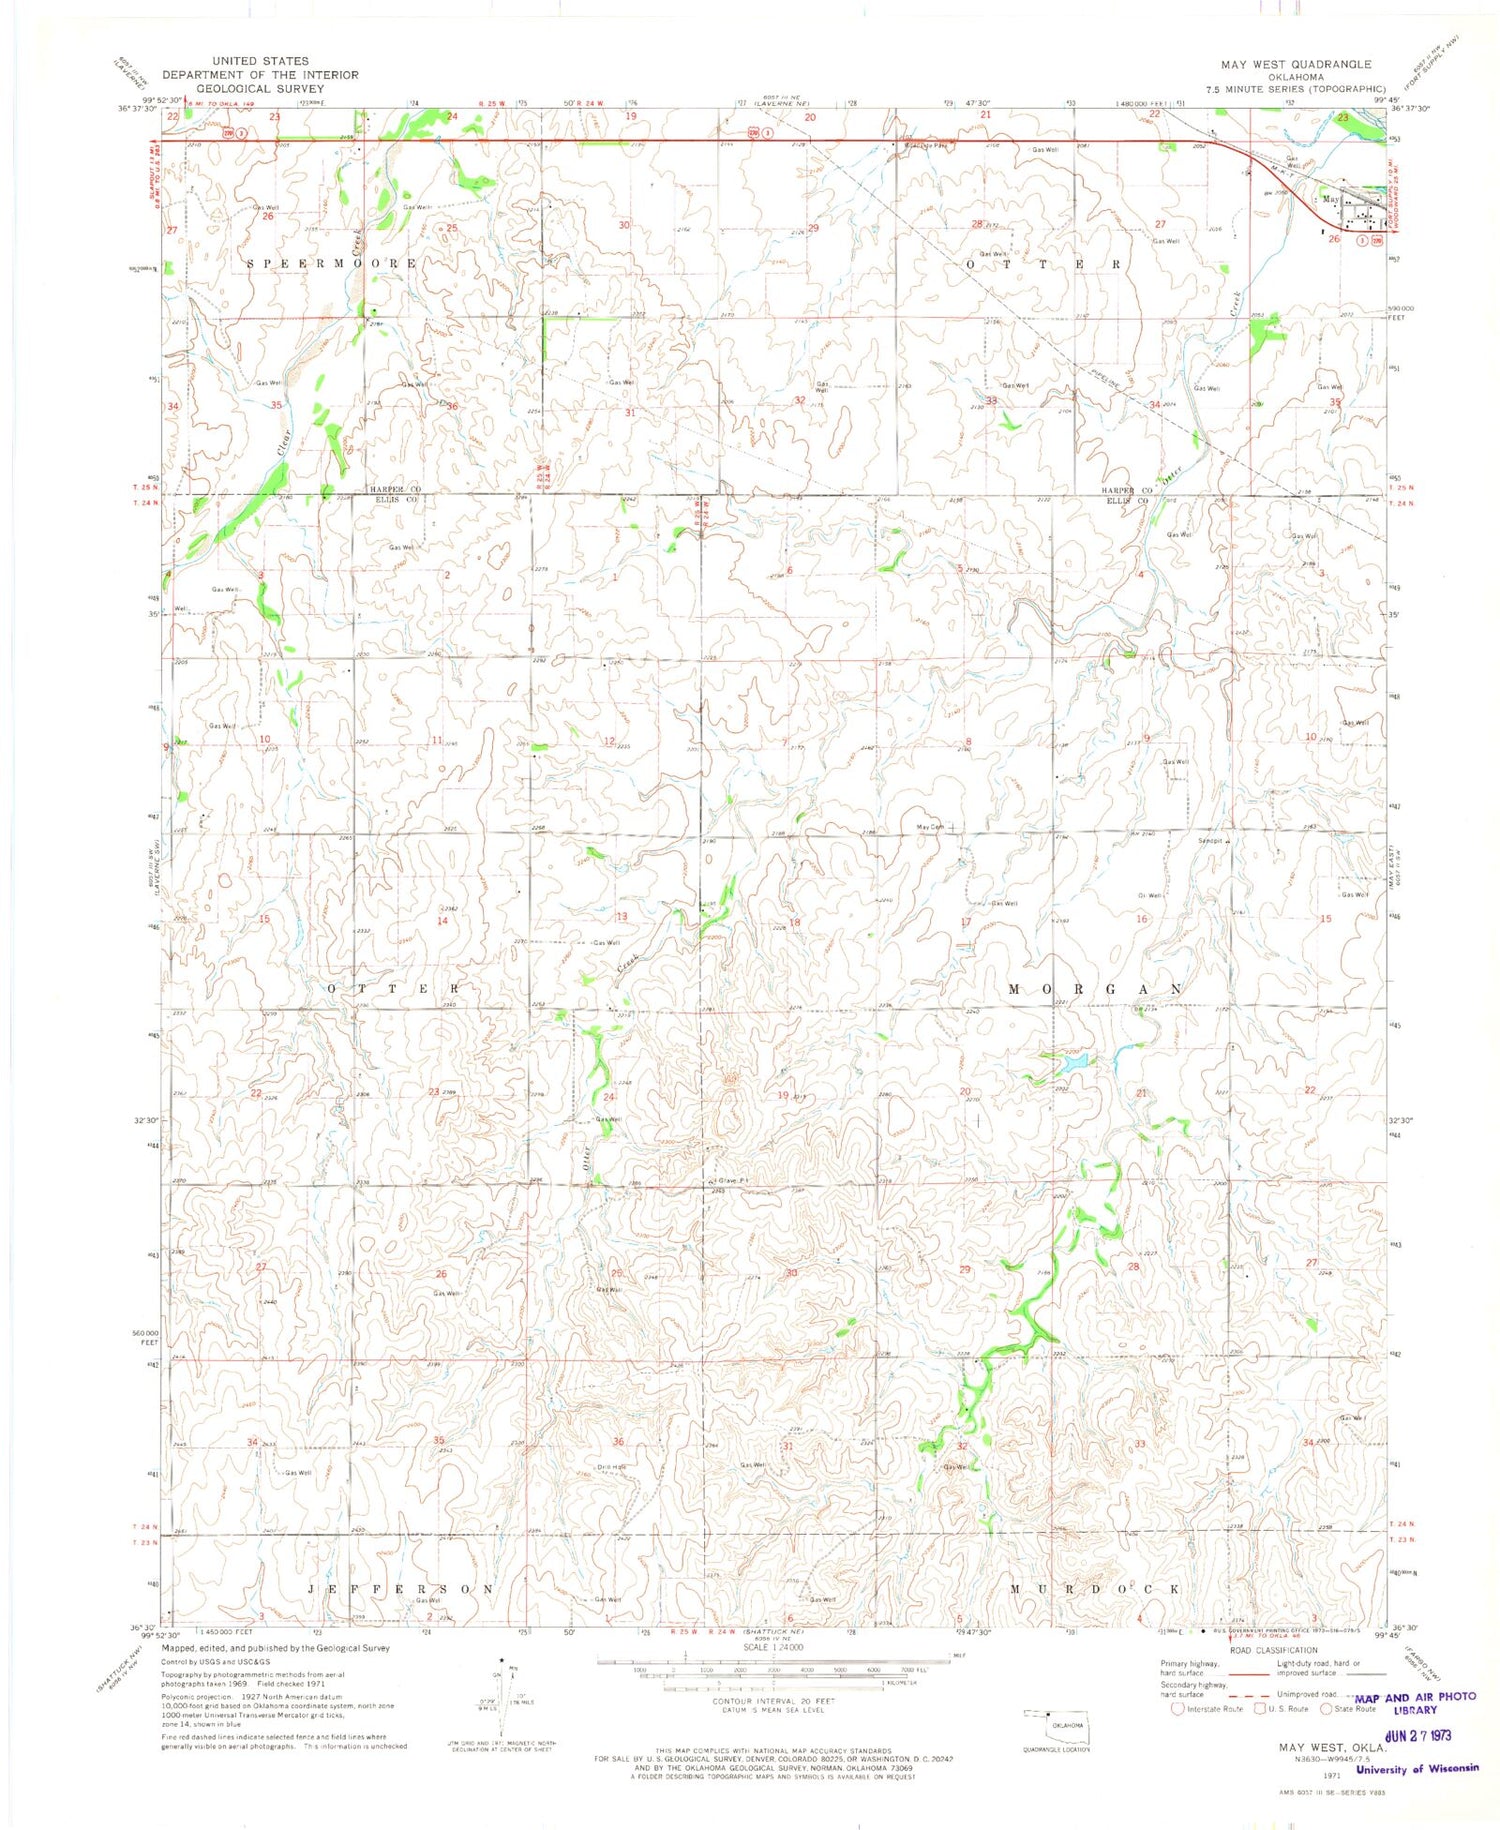 Classic USGS May West Oklahoma 7.5'x7.5' Topo Map Image